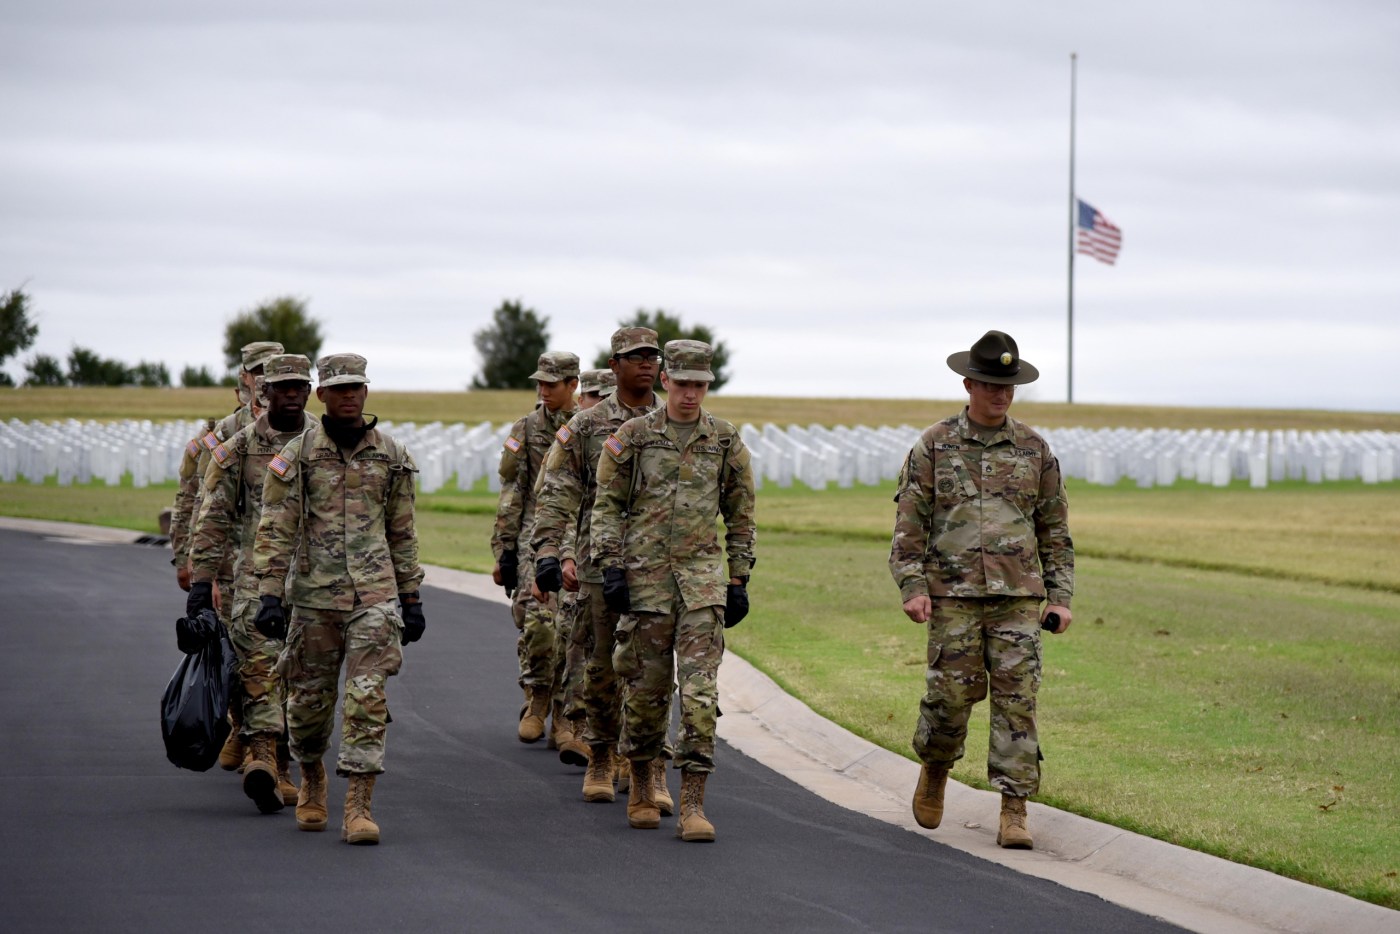 Fort Sill National Cemetery and Army trainees Honor the Fallen